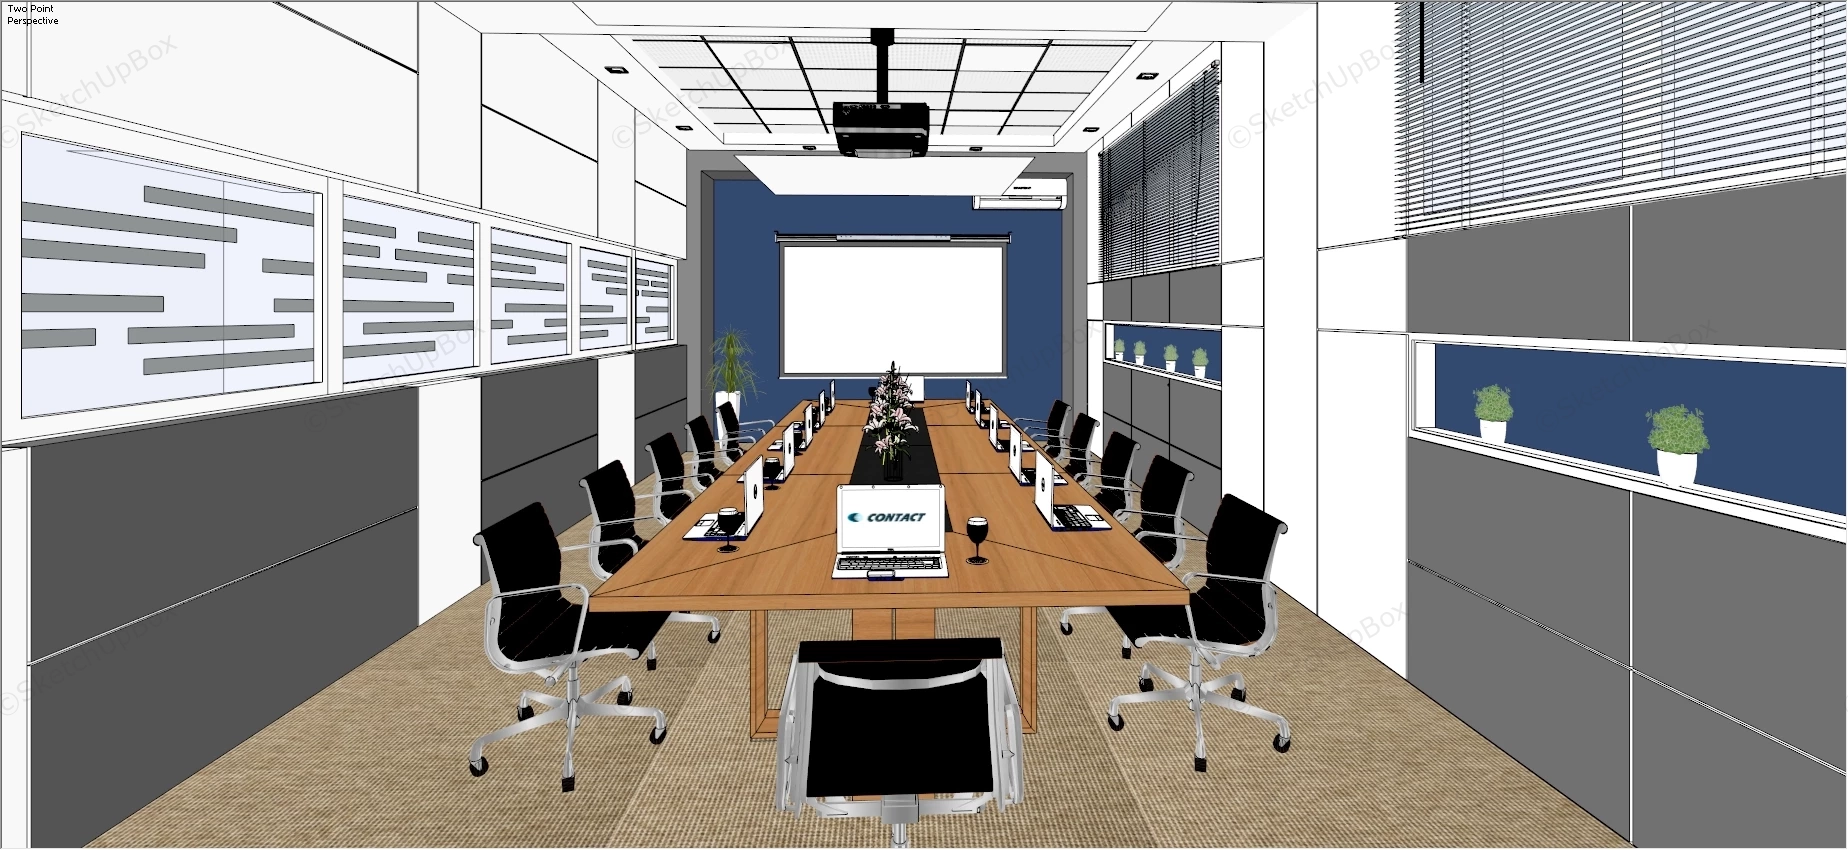 IT Department Conference Room Design sketchup model preview - SketchupBox